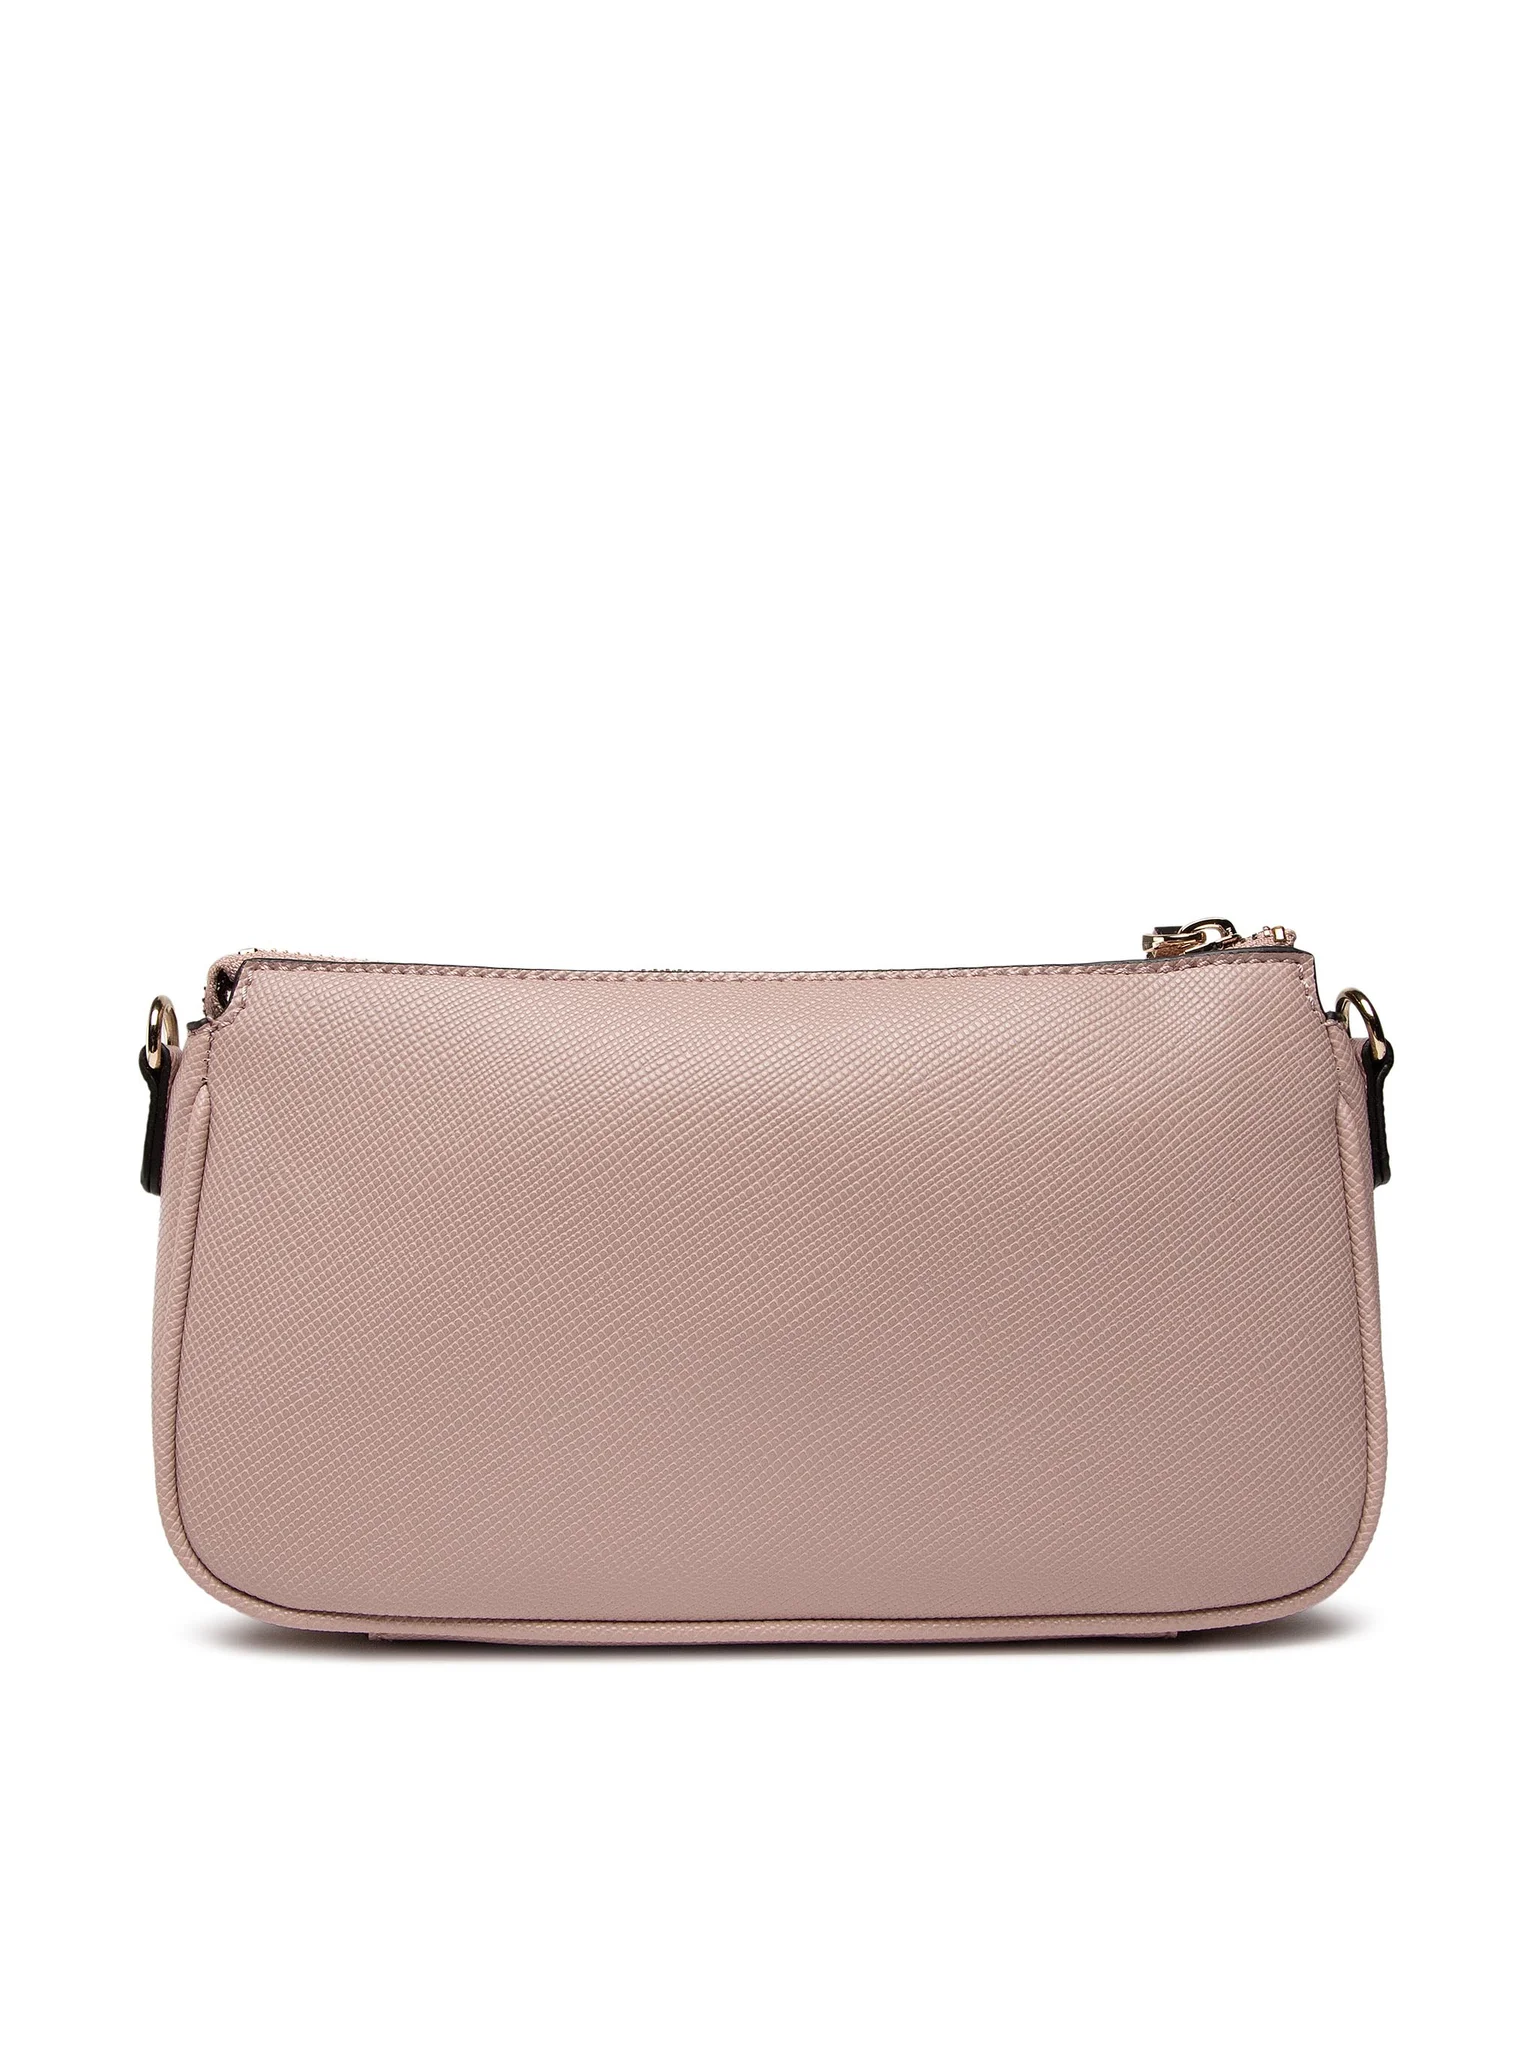 Guess ALEXIE DOUBLE POUCH CROSSBODY